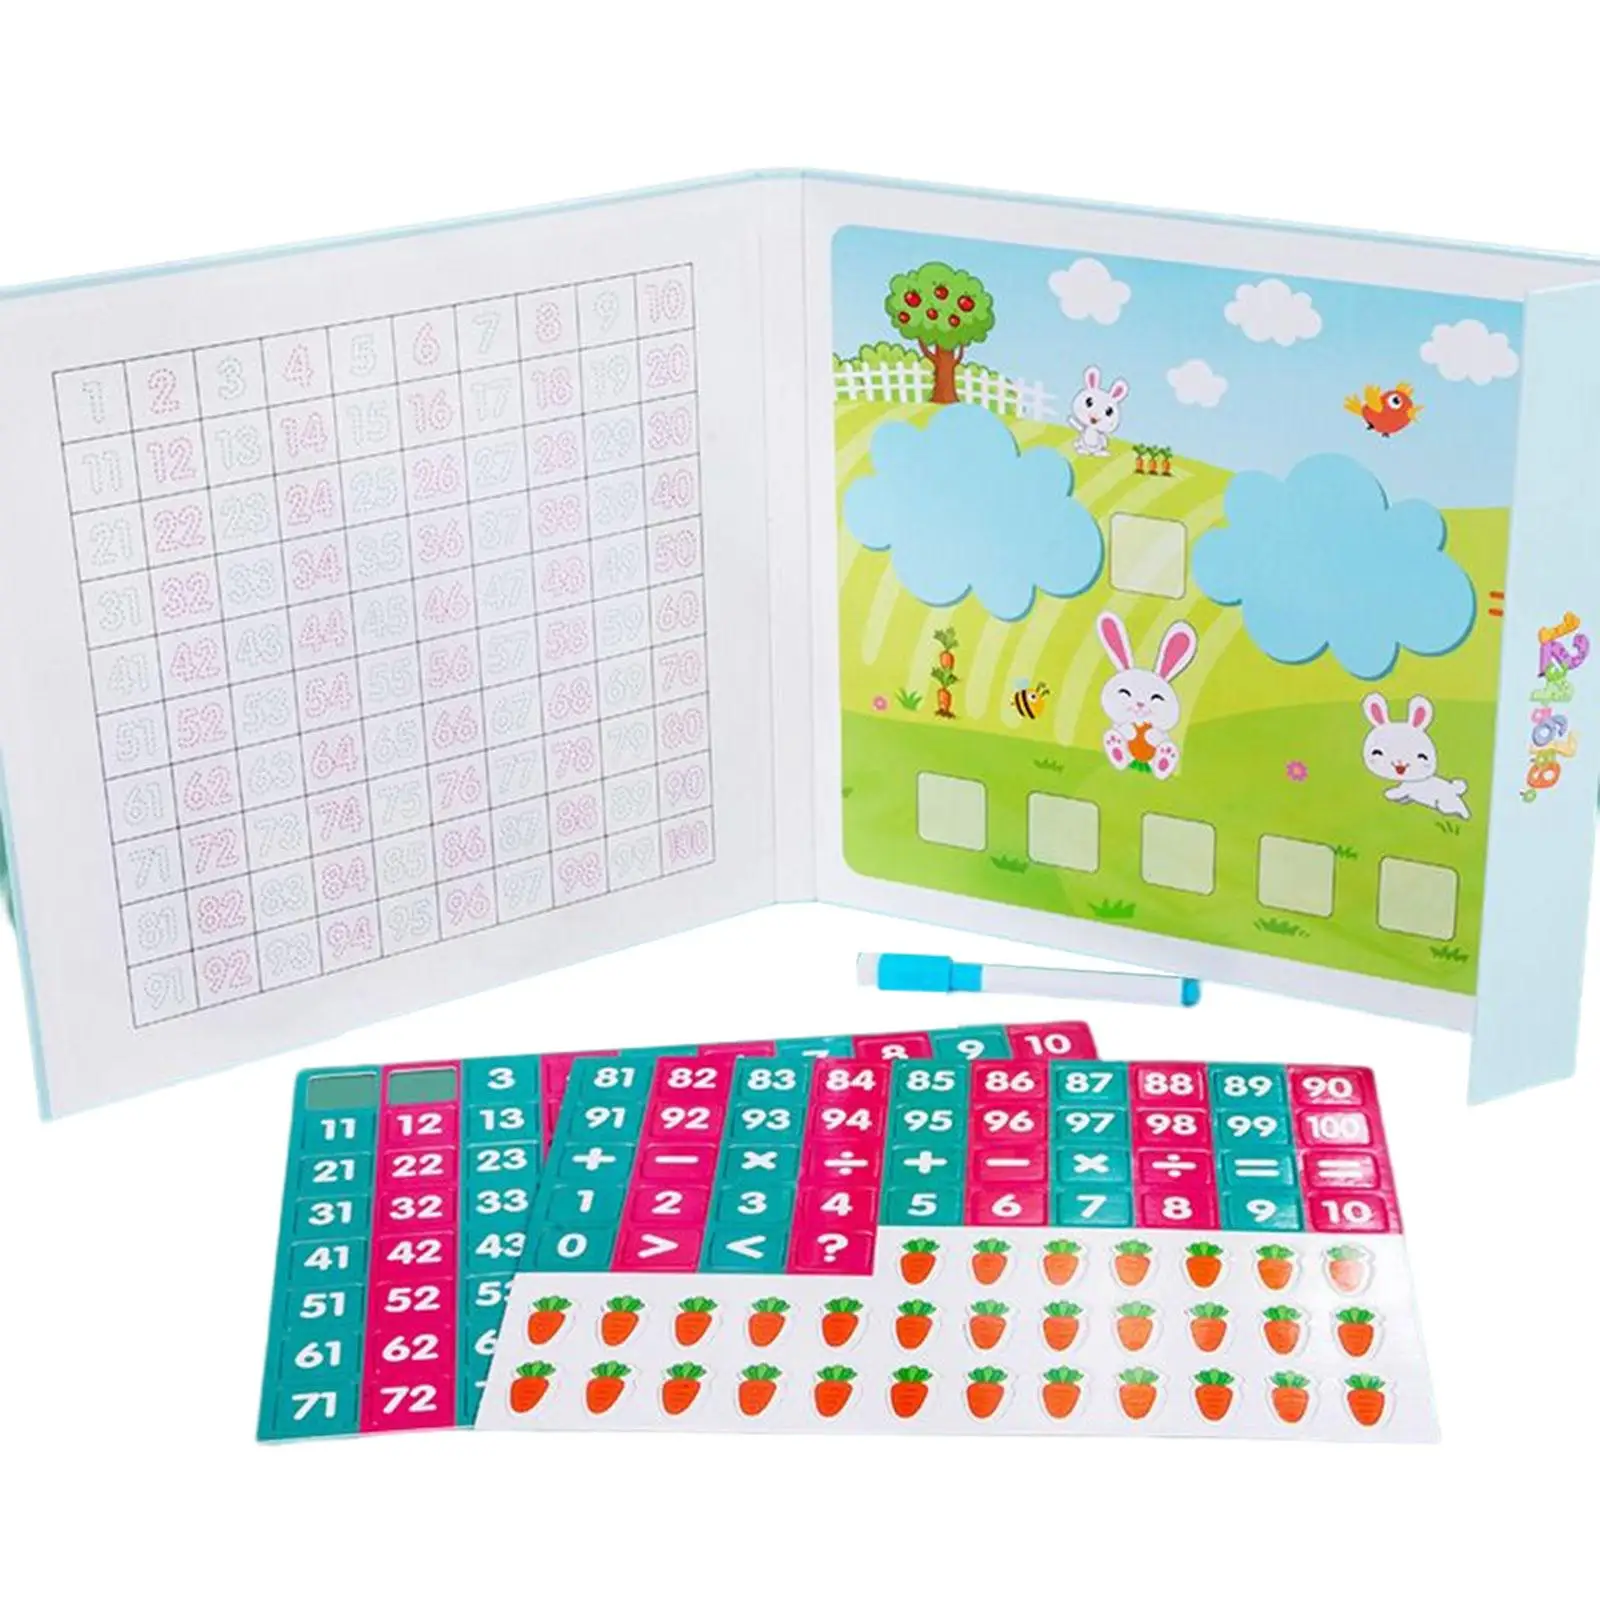 Hundreds Board Number Counting Toys Addition Subtraction Number Recognition Math Manipulatives Board Educational for Preshcool